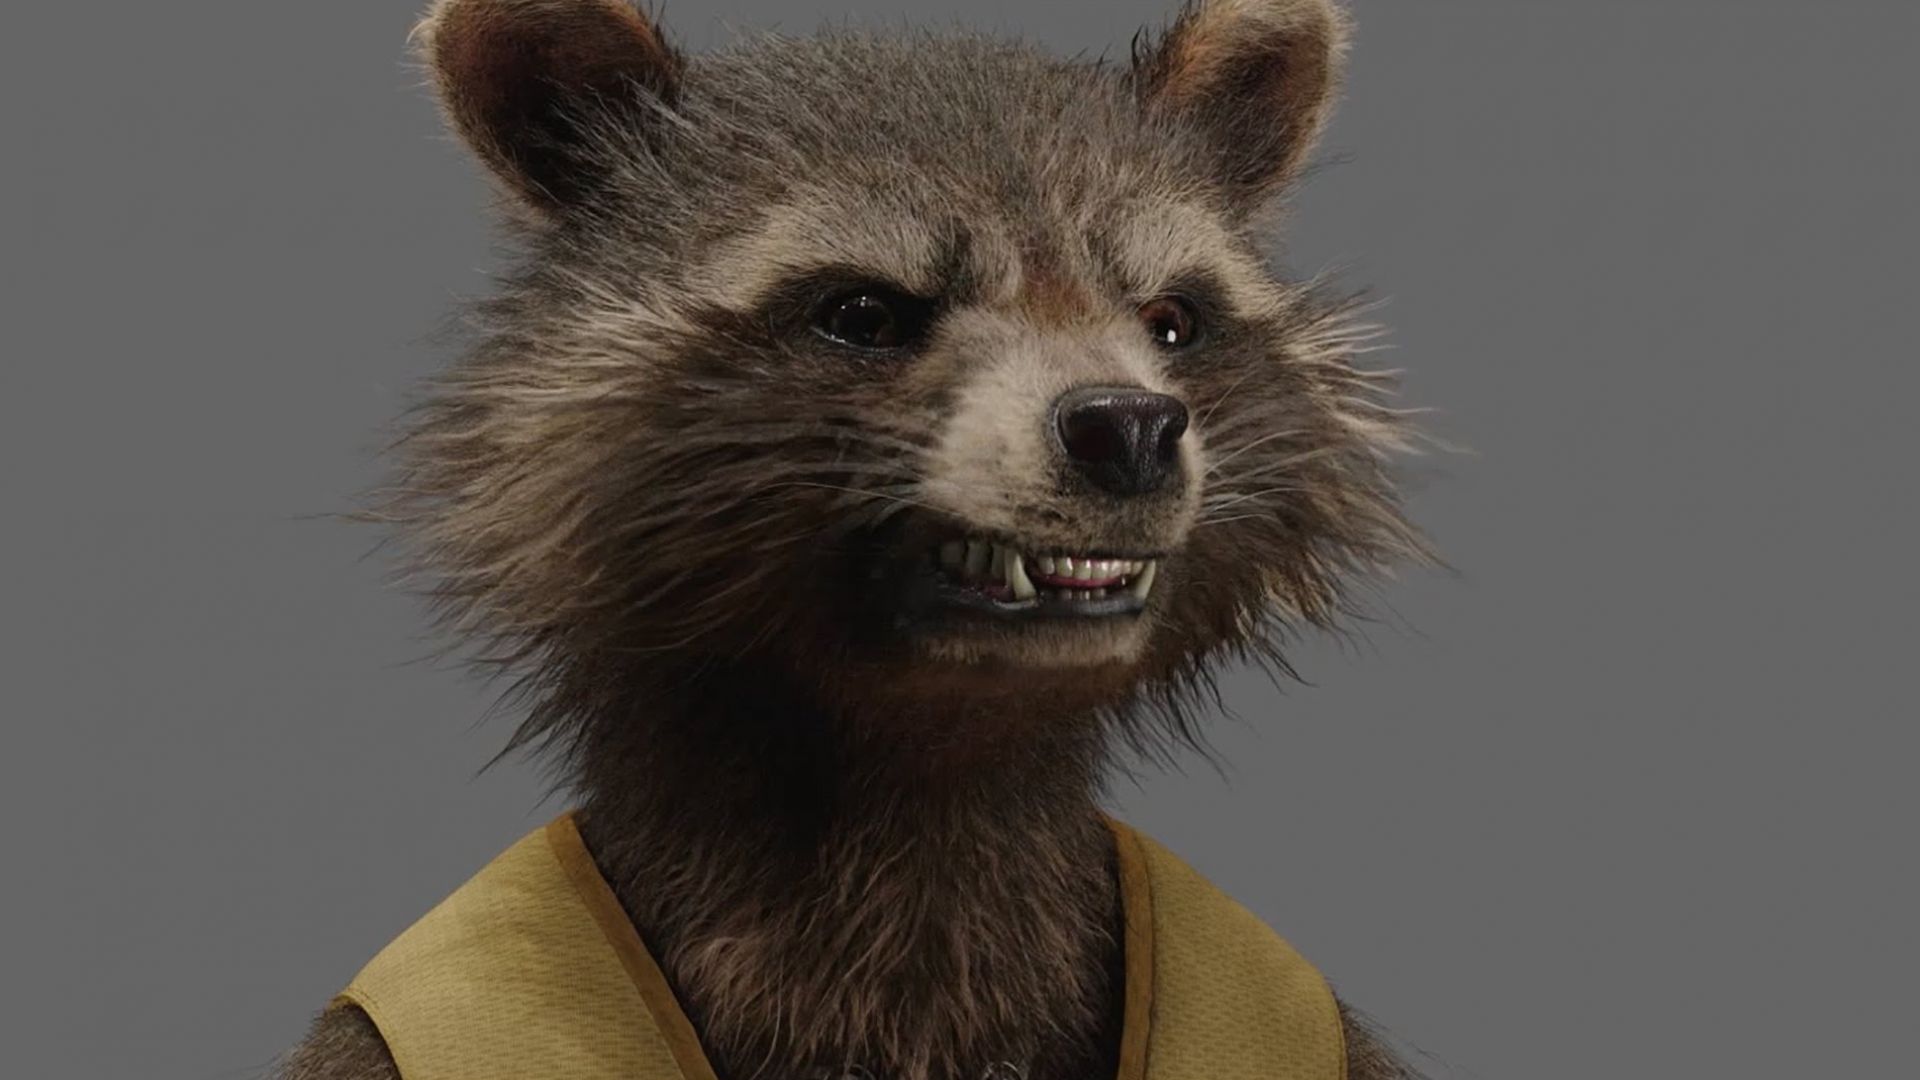 Bringing the Guardians of the Galaxy’s Angriest Raccoon to